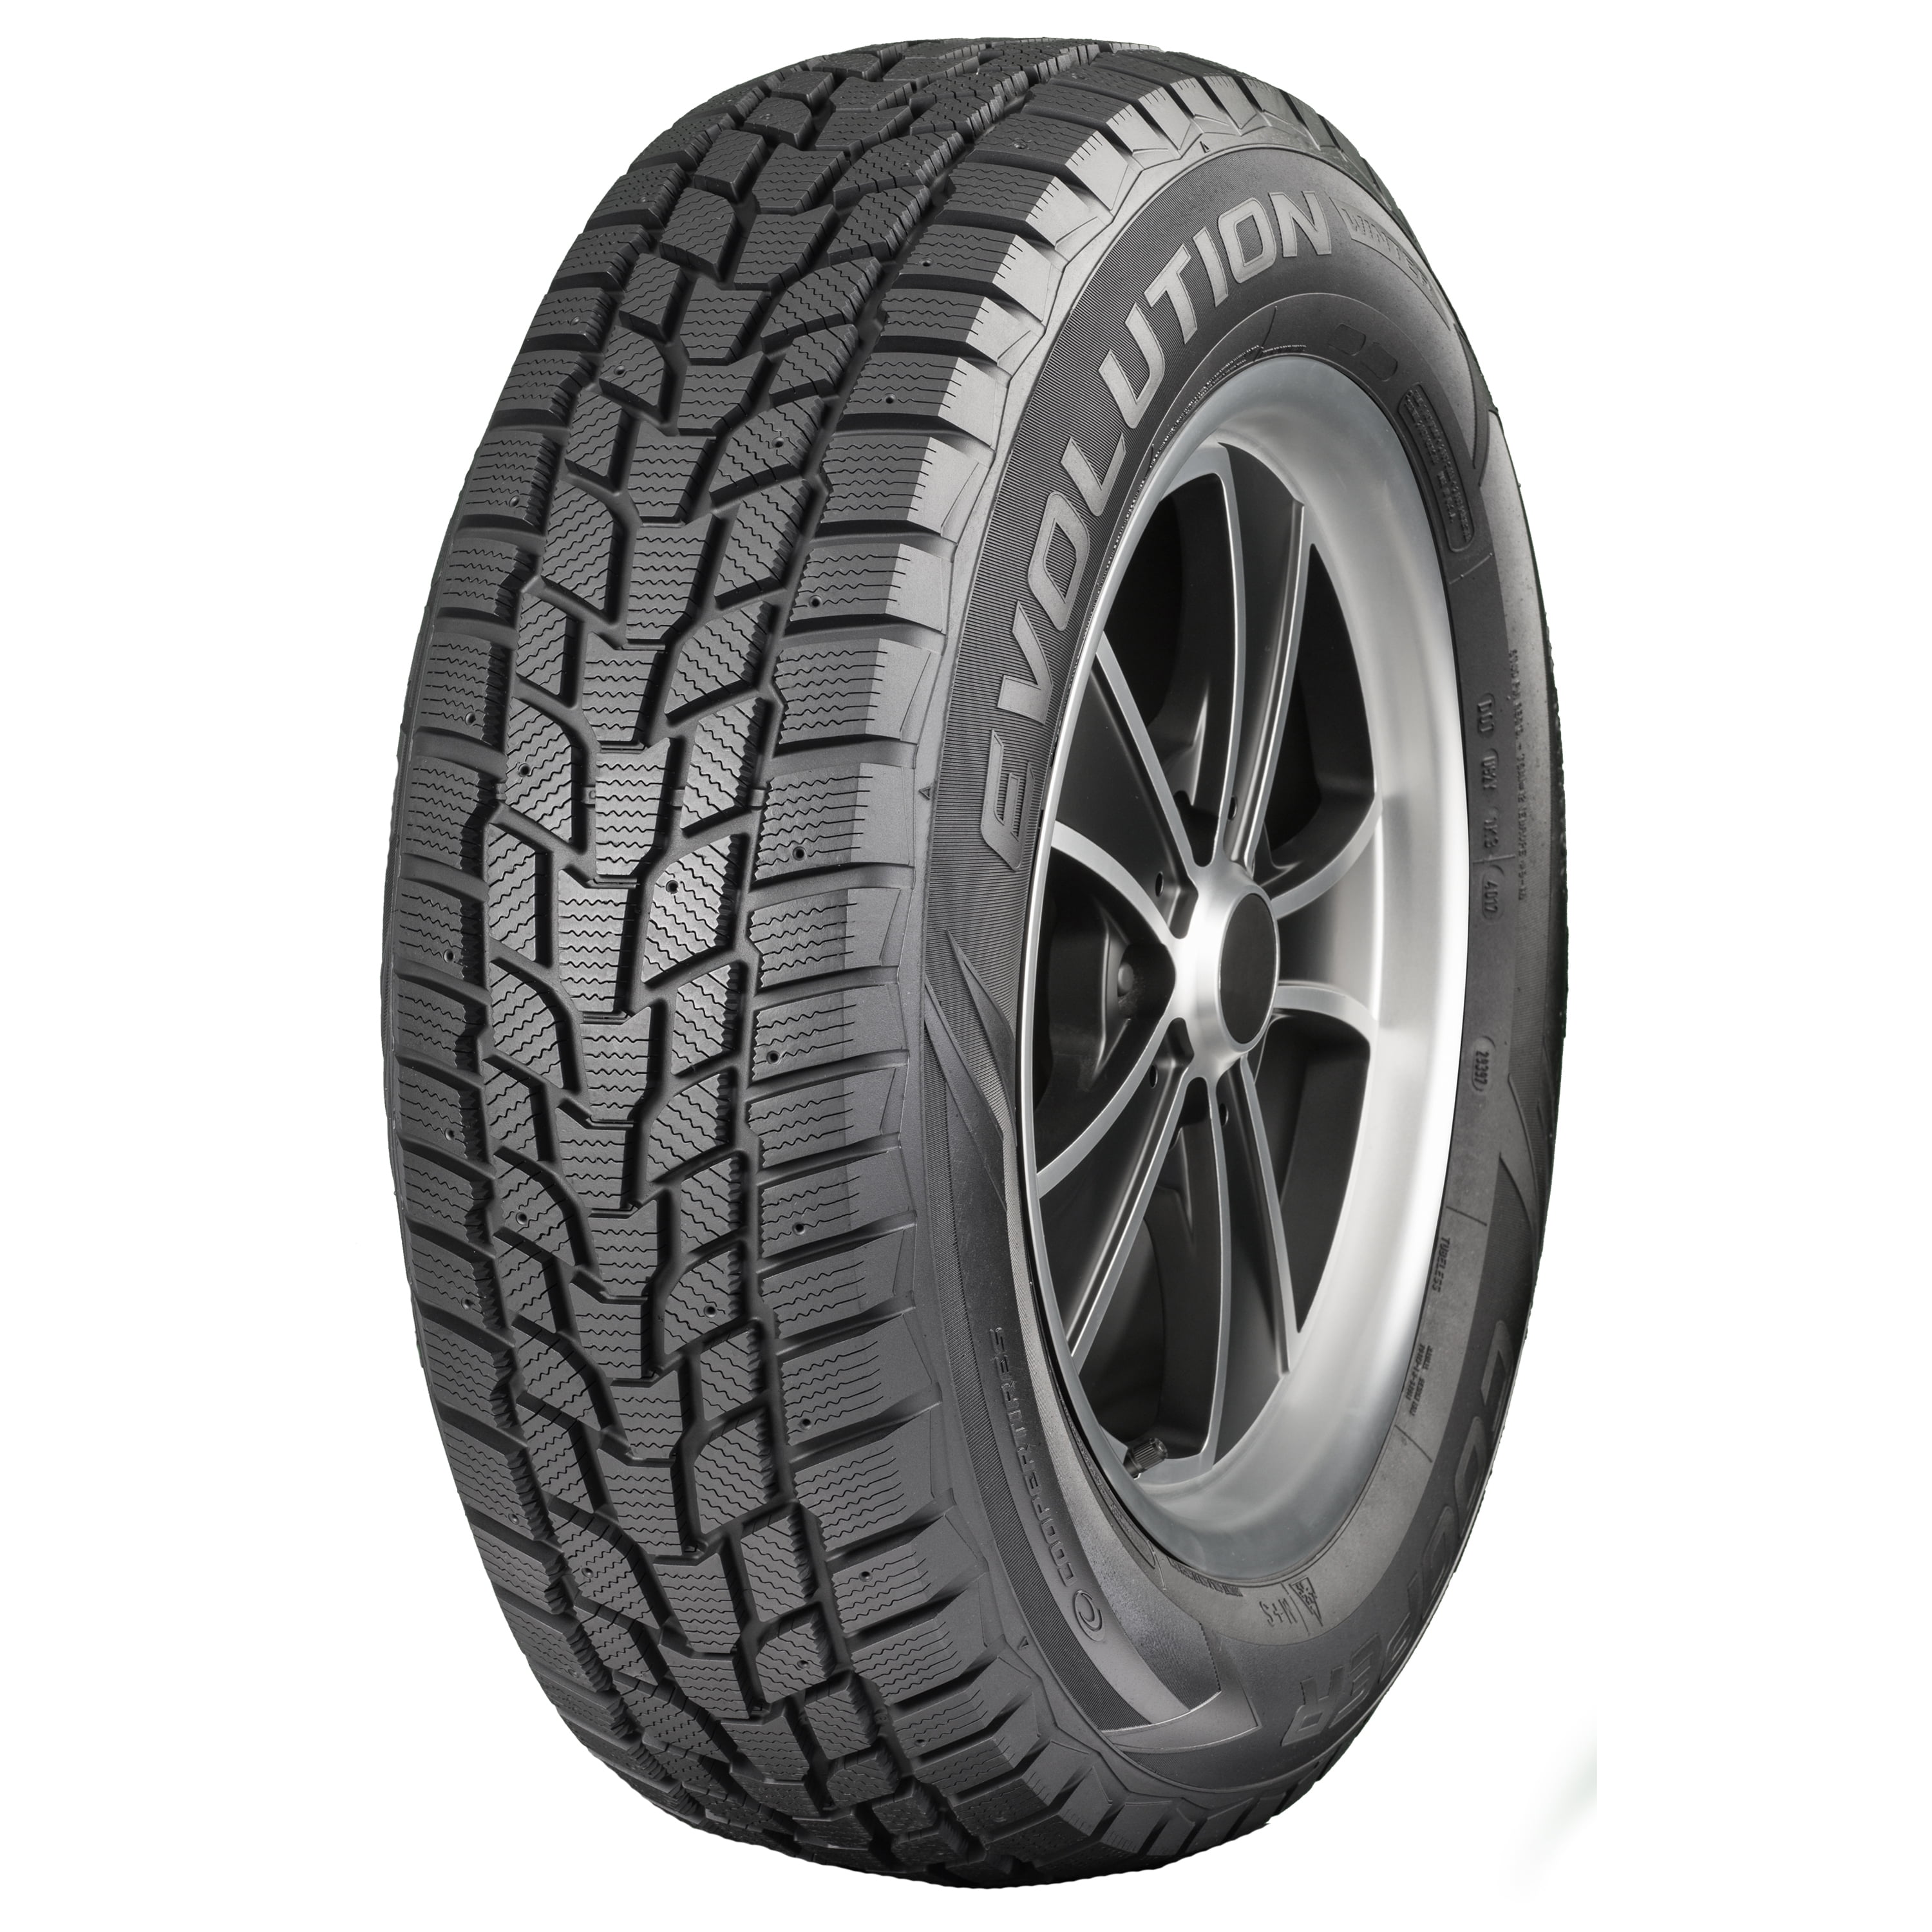 General Altimax Arctic 12 Studable-Winter Radial Tire-225/50R18 99T XL-ply 